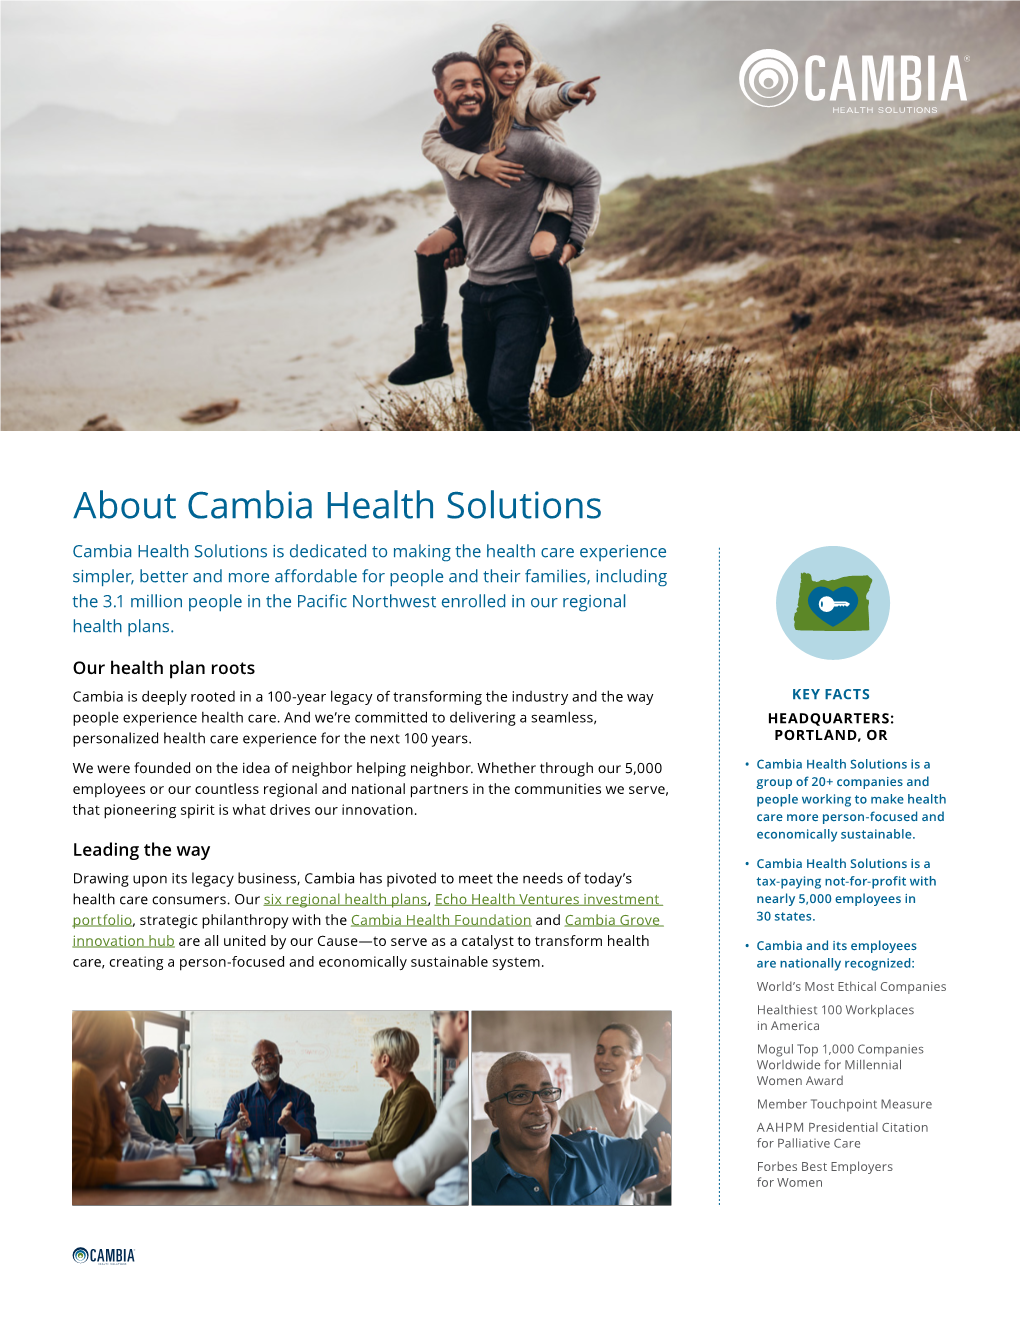 About Cambia Health Solutions